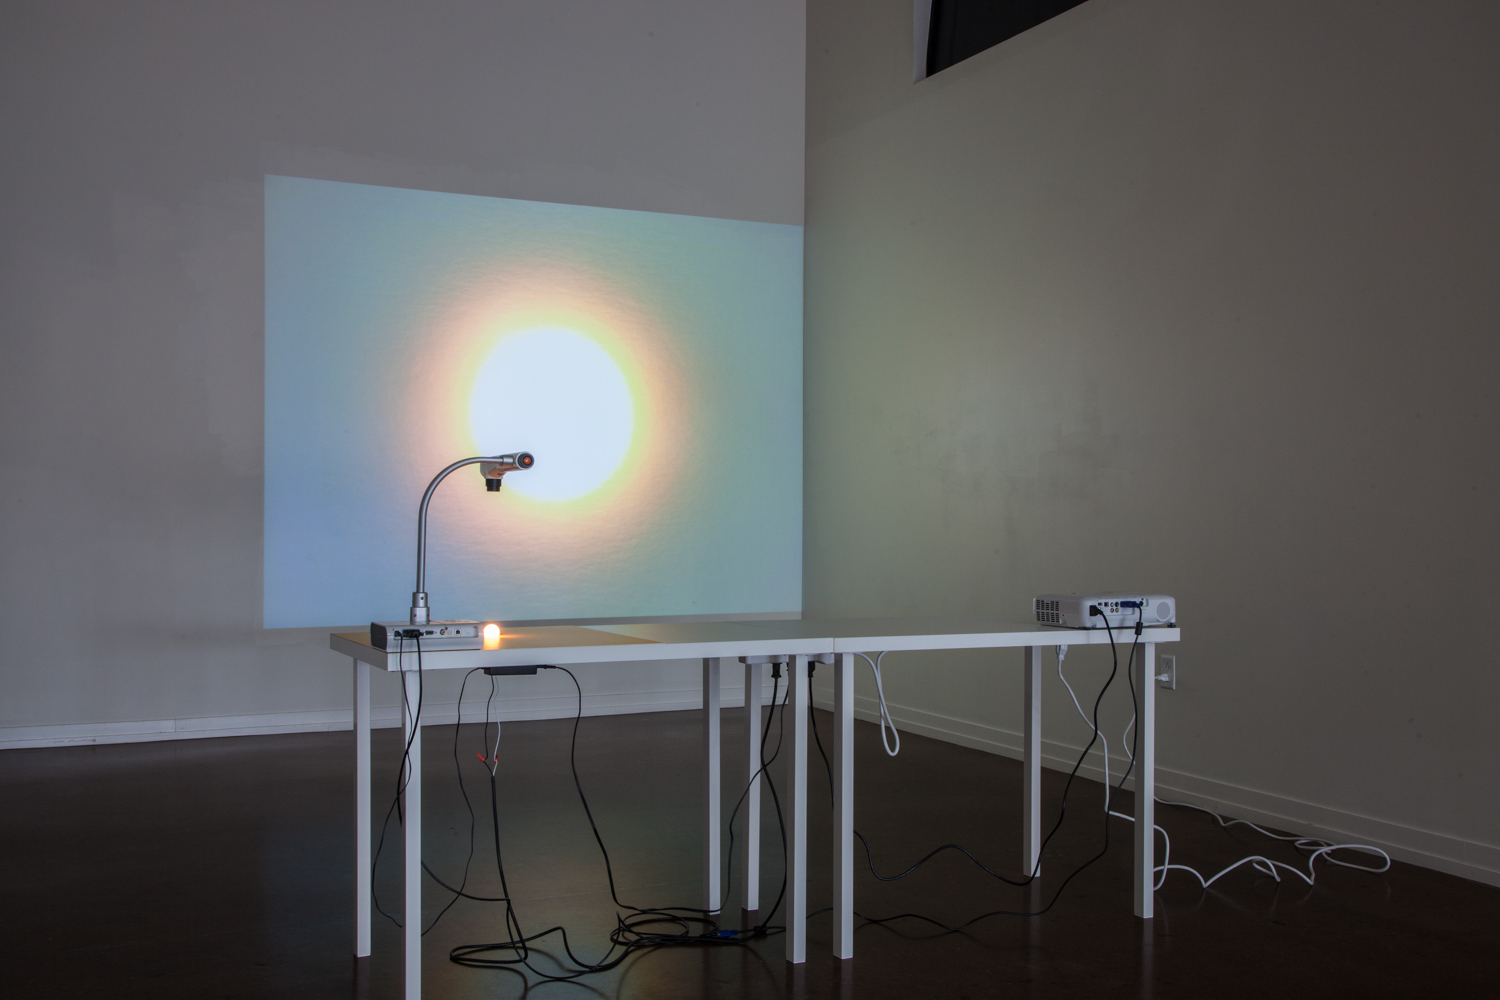 Patrick DeGuira- Building a Sun, 2015 - 16 Digitizer, video projector, 7W bulb, matboard, prefabricated table tops, painted steel; dimensions variable